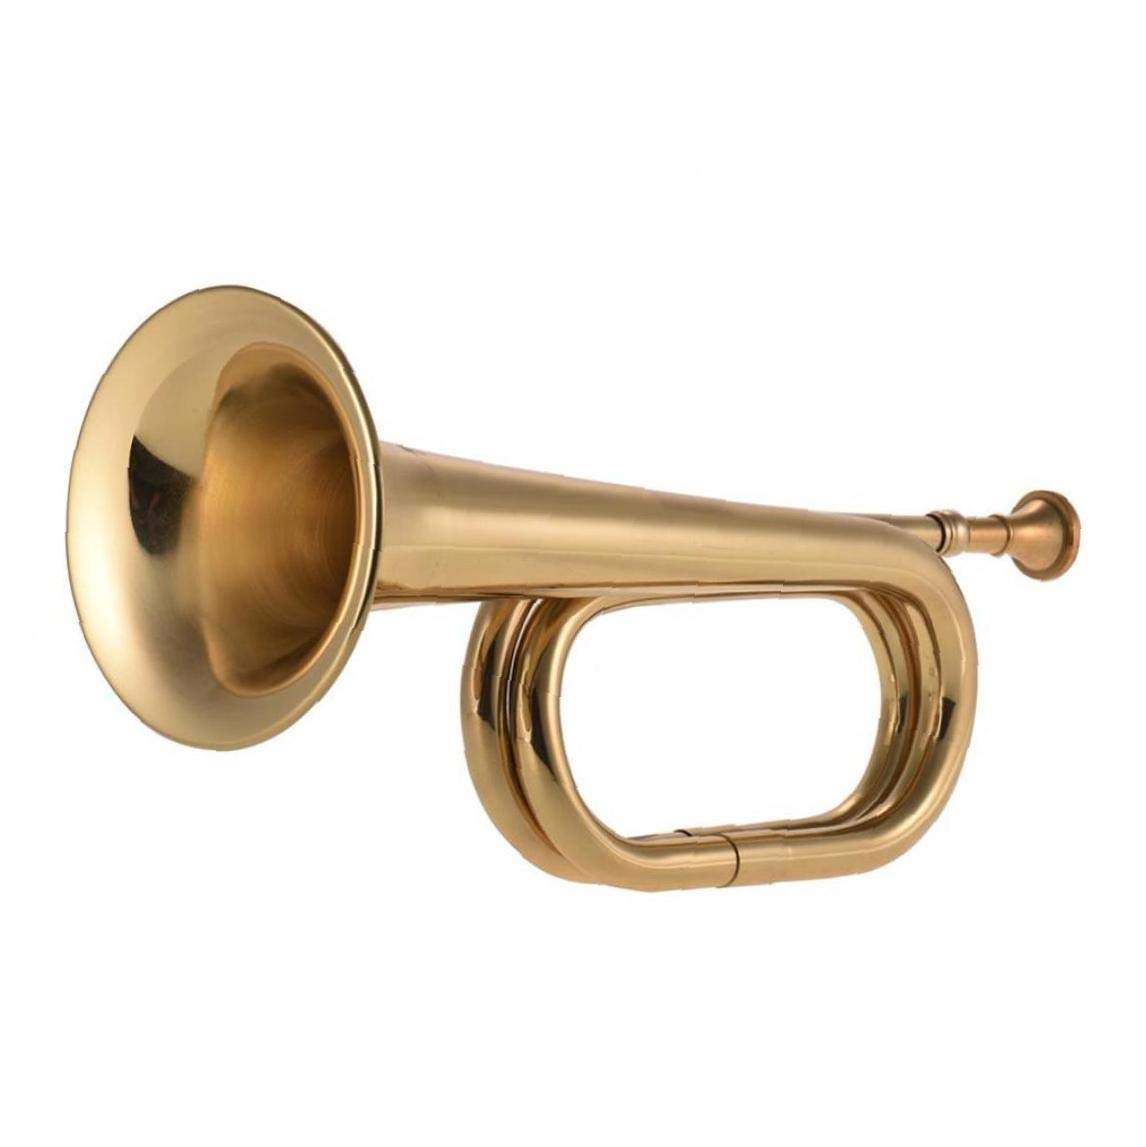 1pc B Flat Bugle Call Trompete Messing Kavallerie Horn Für School Band Kavallerie Orchestra